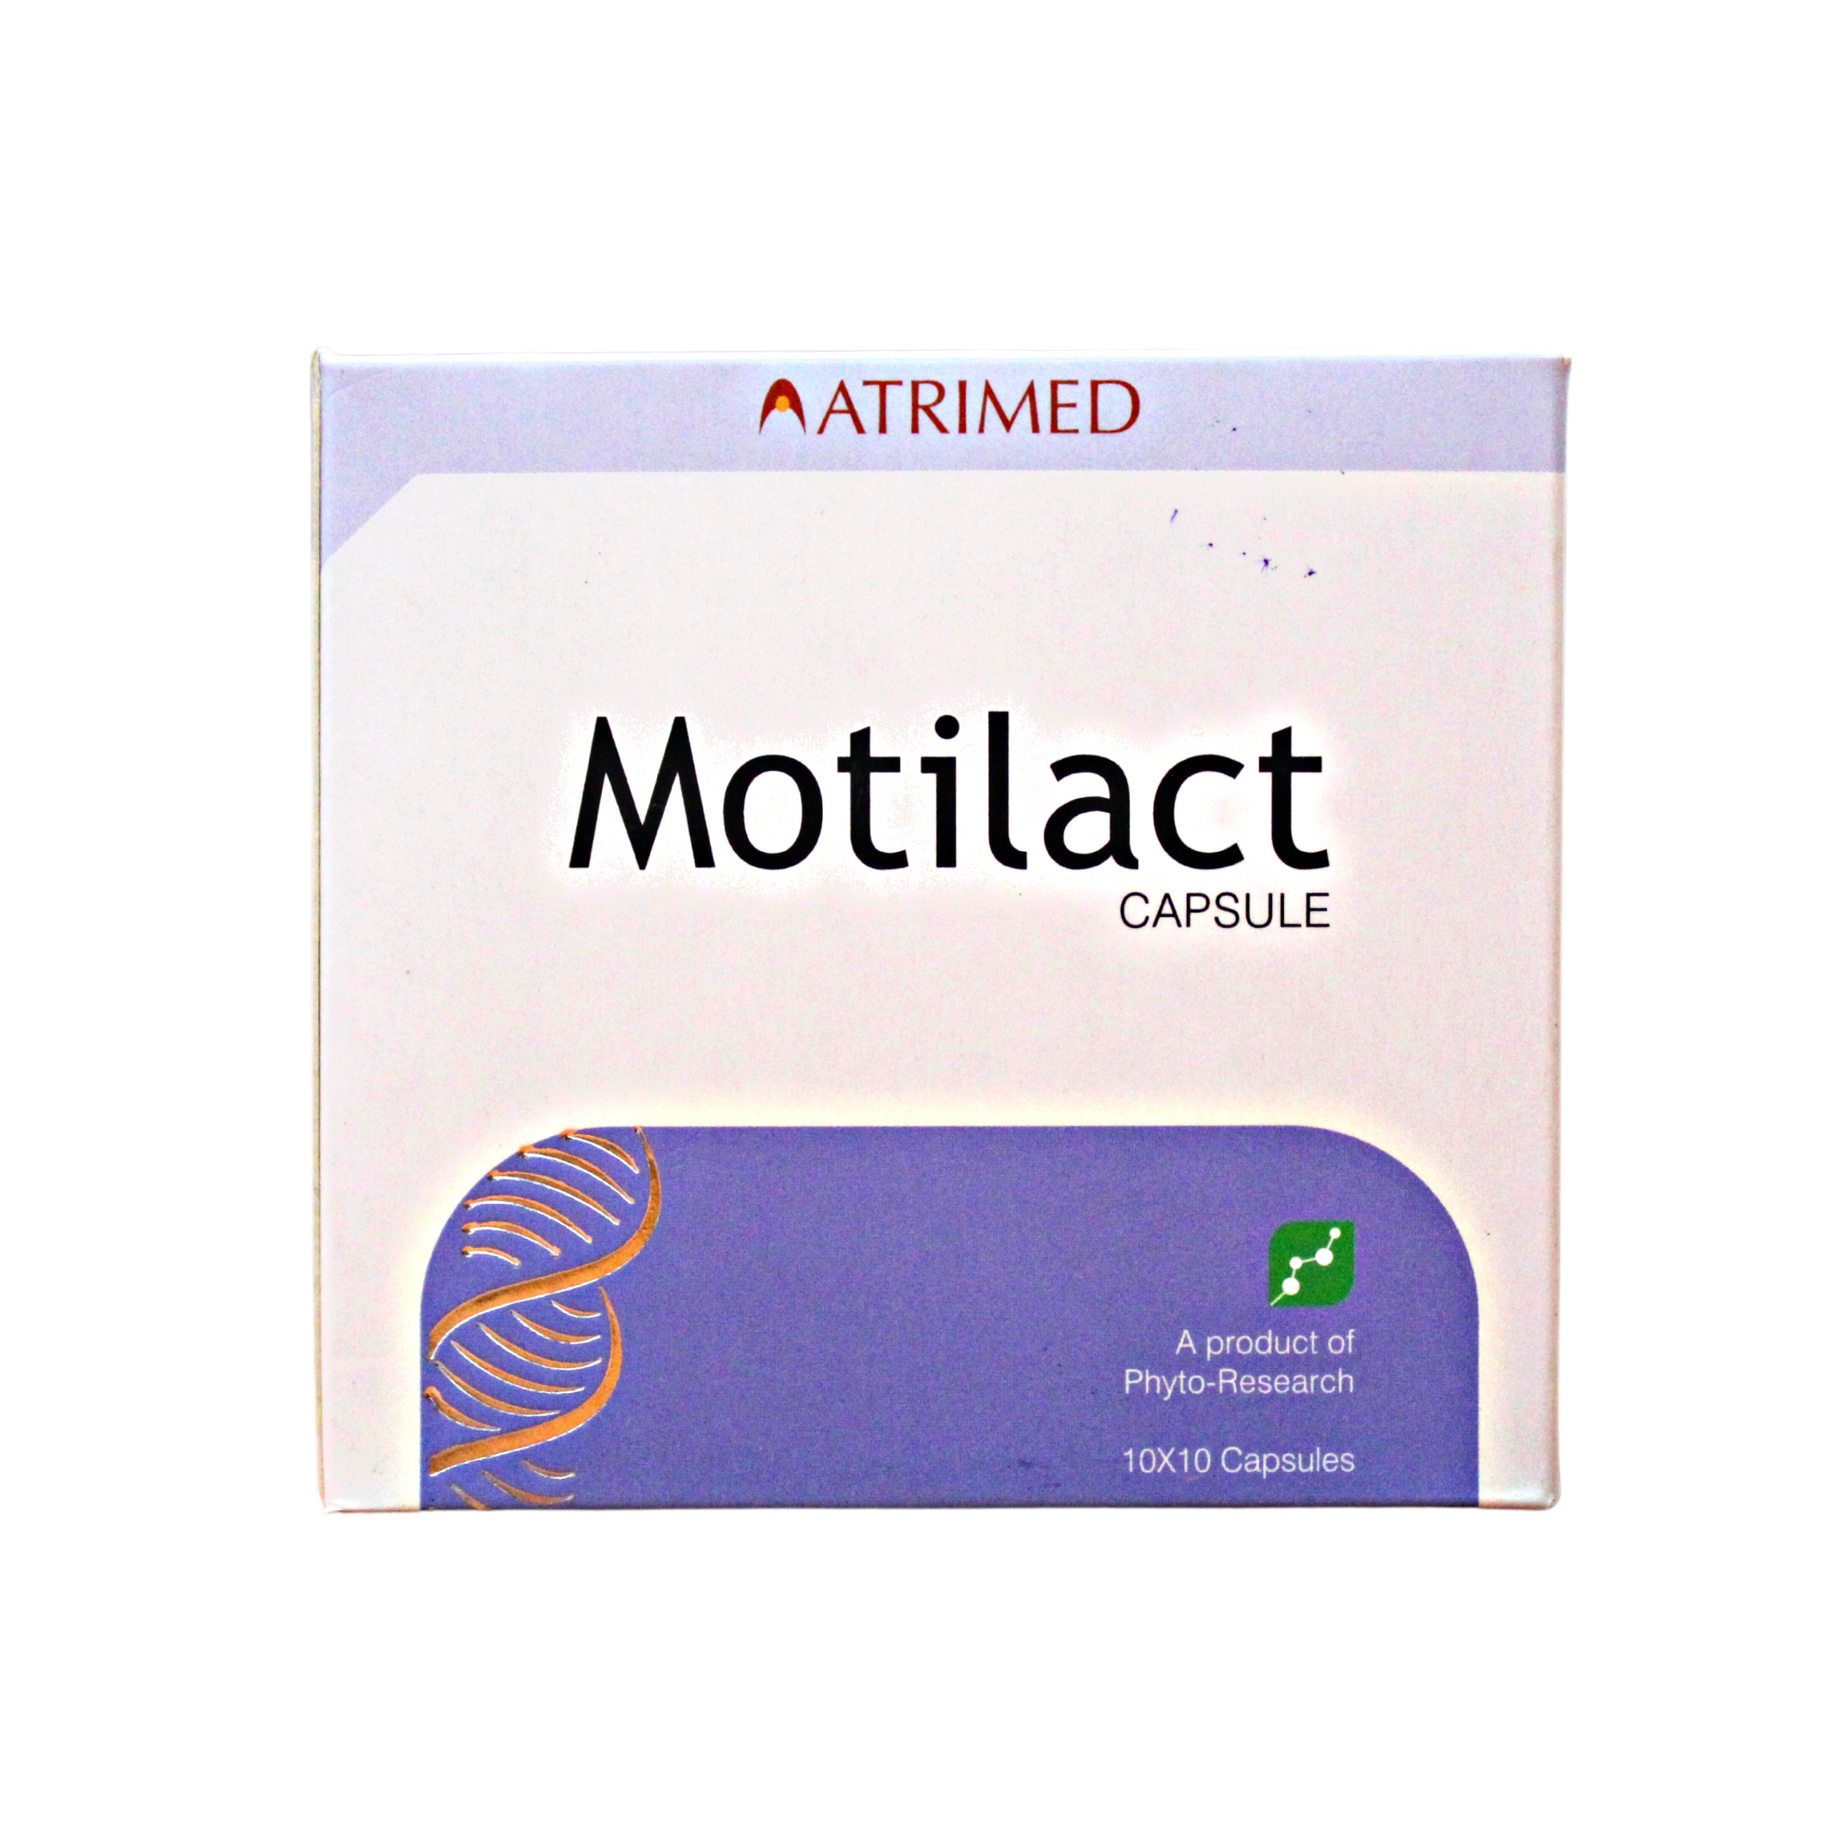 Shop Motilact capsules - 10Capsules at price 80.00 from Atrimed Online - Ayush Care